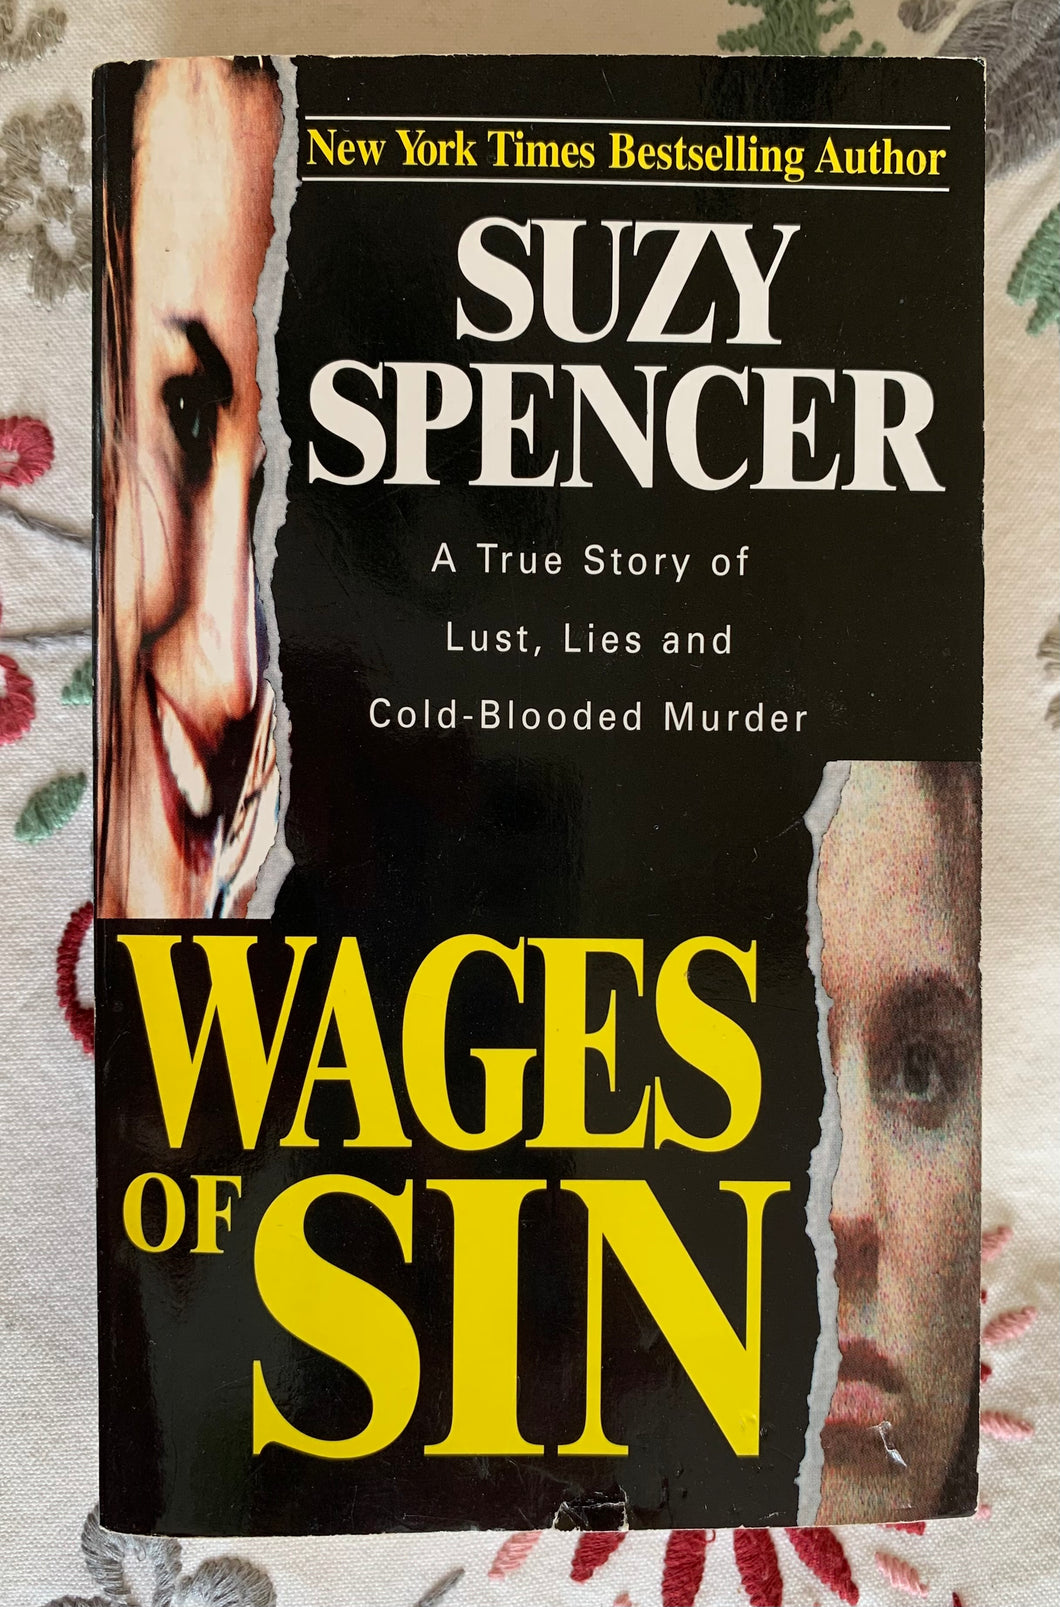 Wages of Sin: A True Story of Lust, Lies and Cold-Blooded Murder